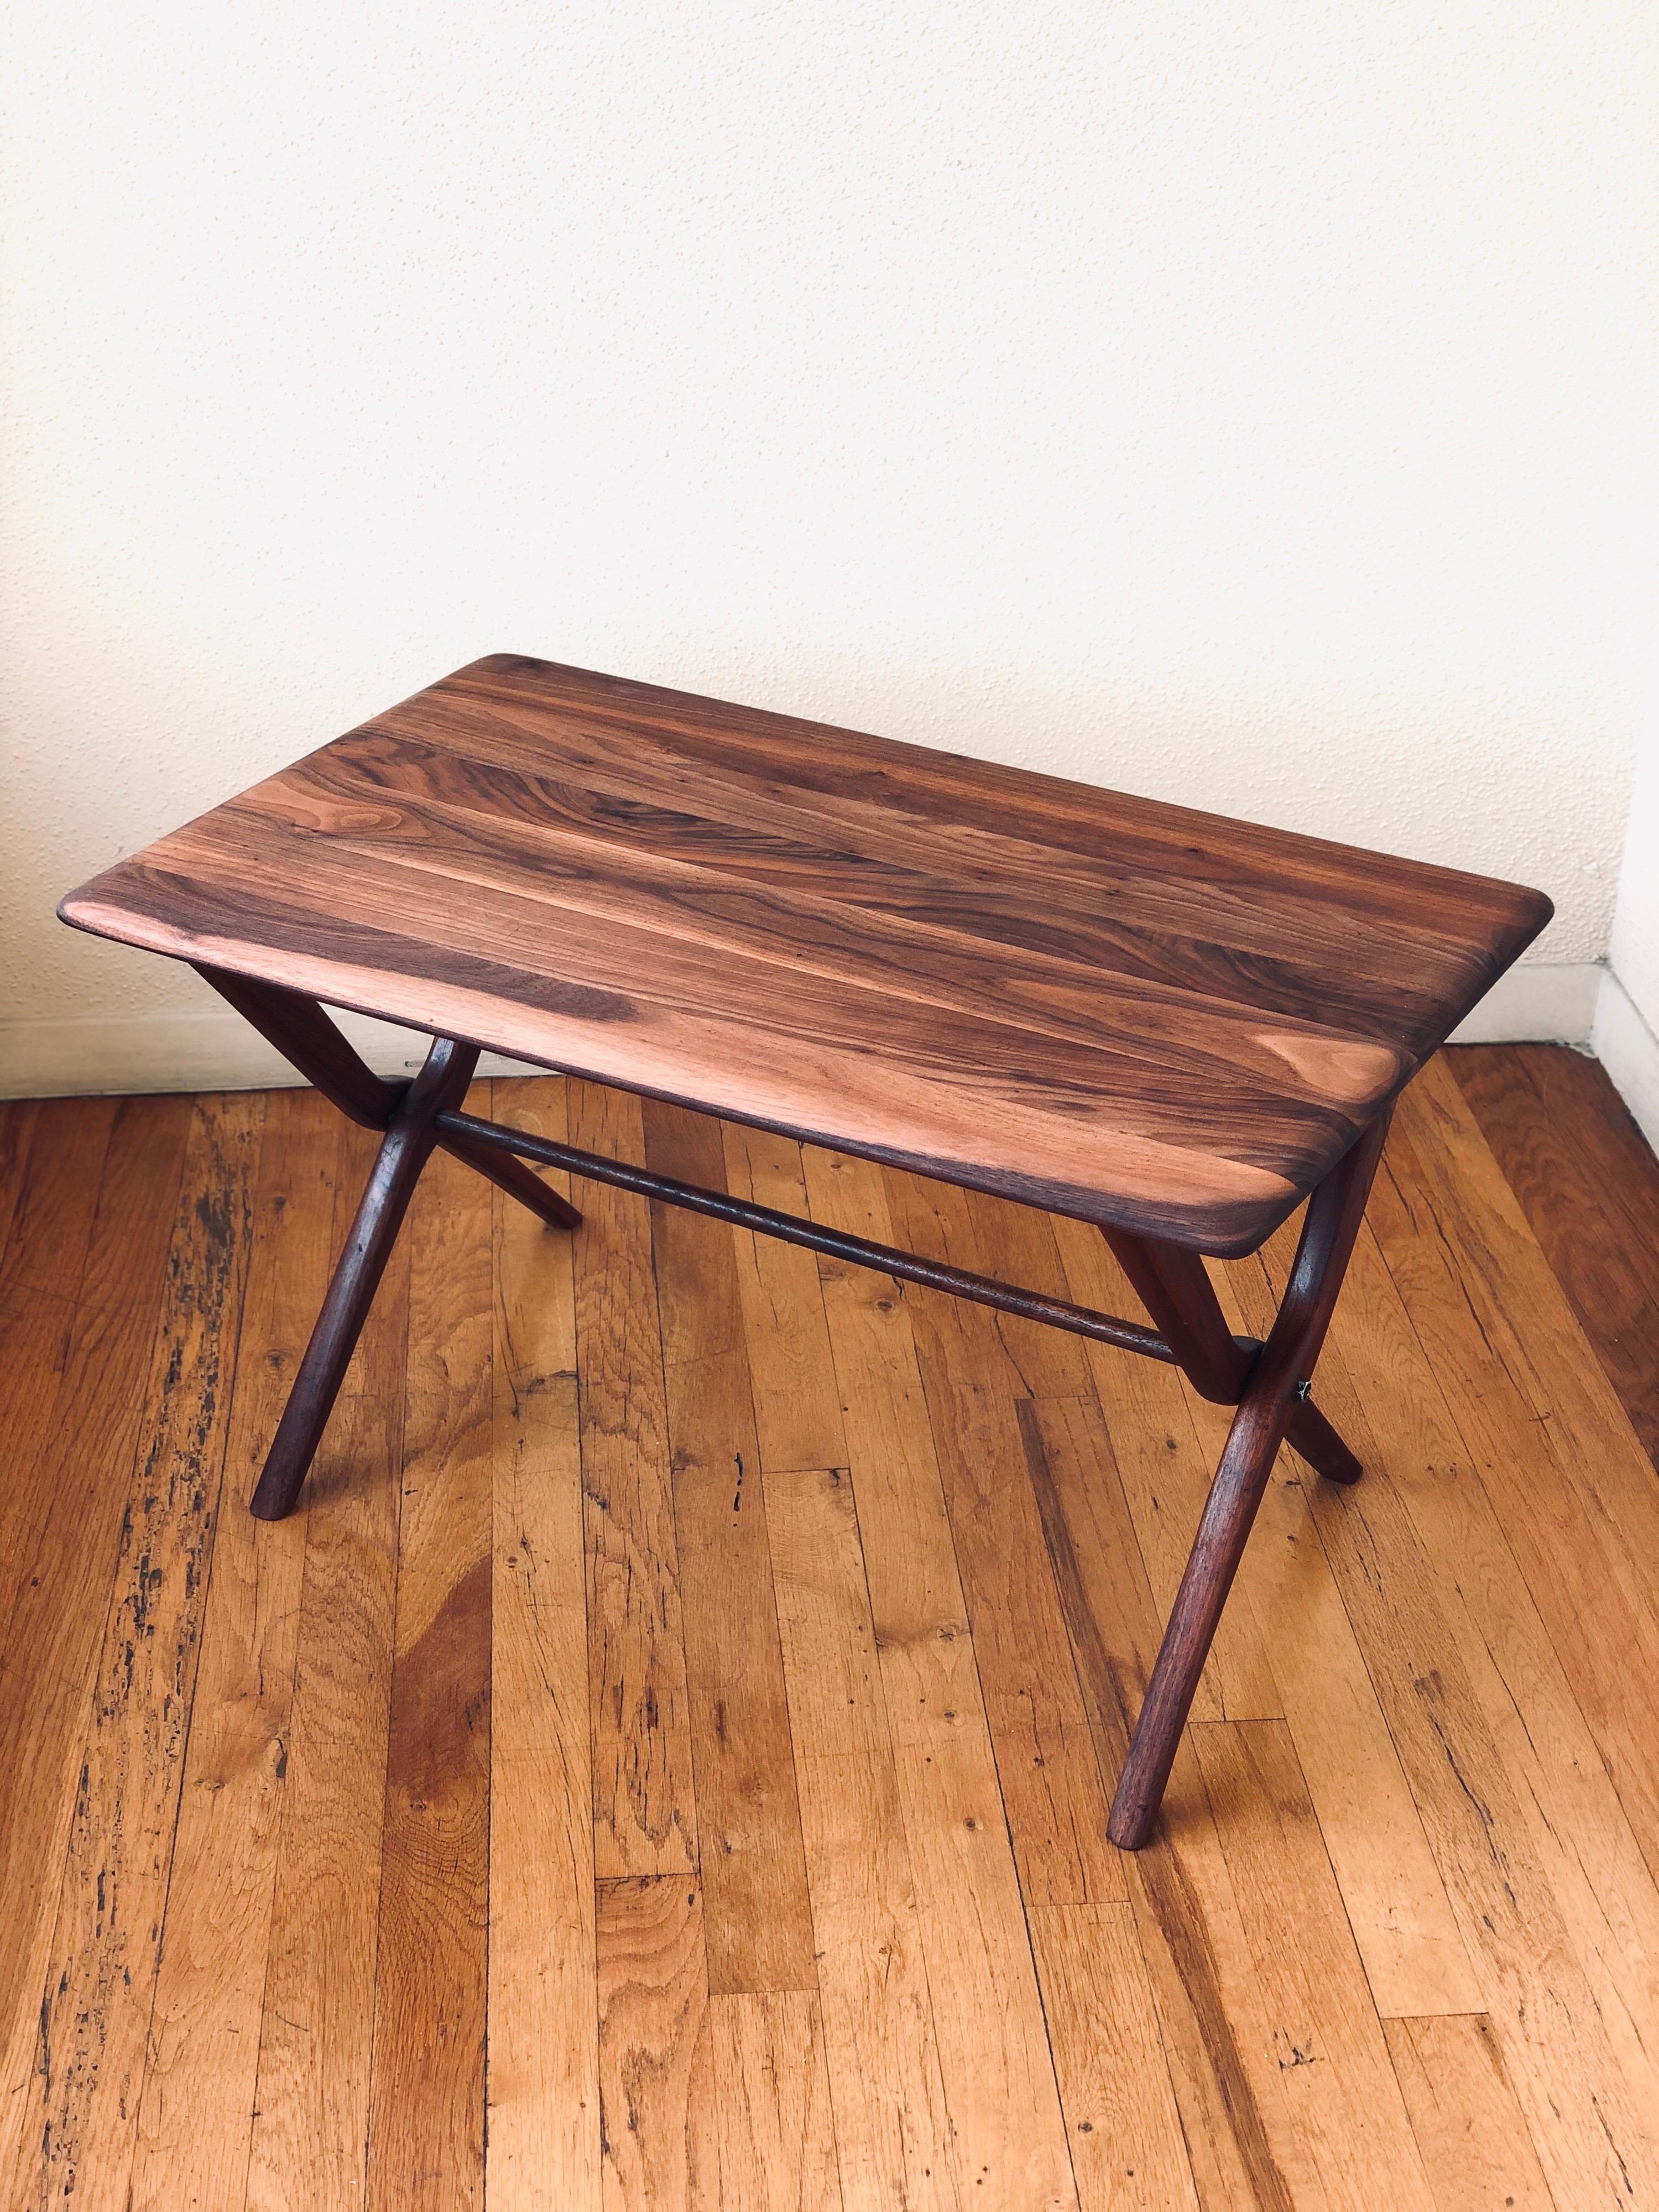 Beautiful stylish solid walnut solid table we refinished the top and oiled beautiful grain, solid and sturdy nice cross legs design with middle bar, circa 1950s probably California design.